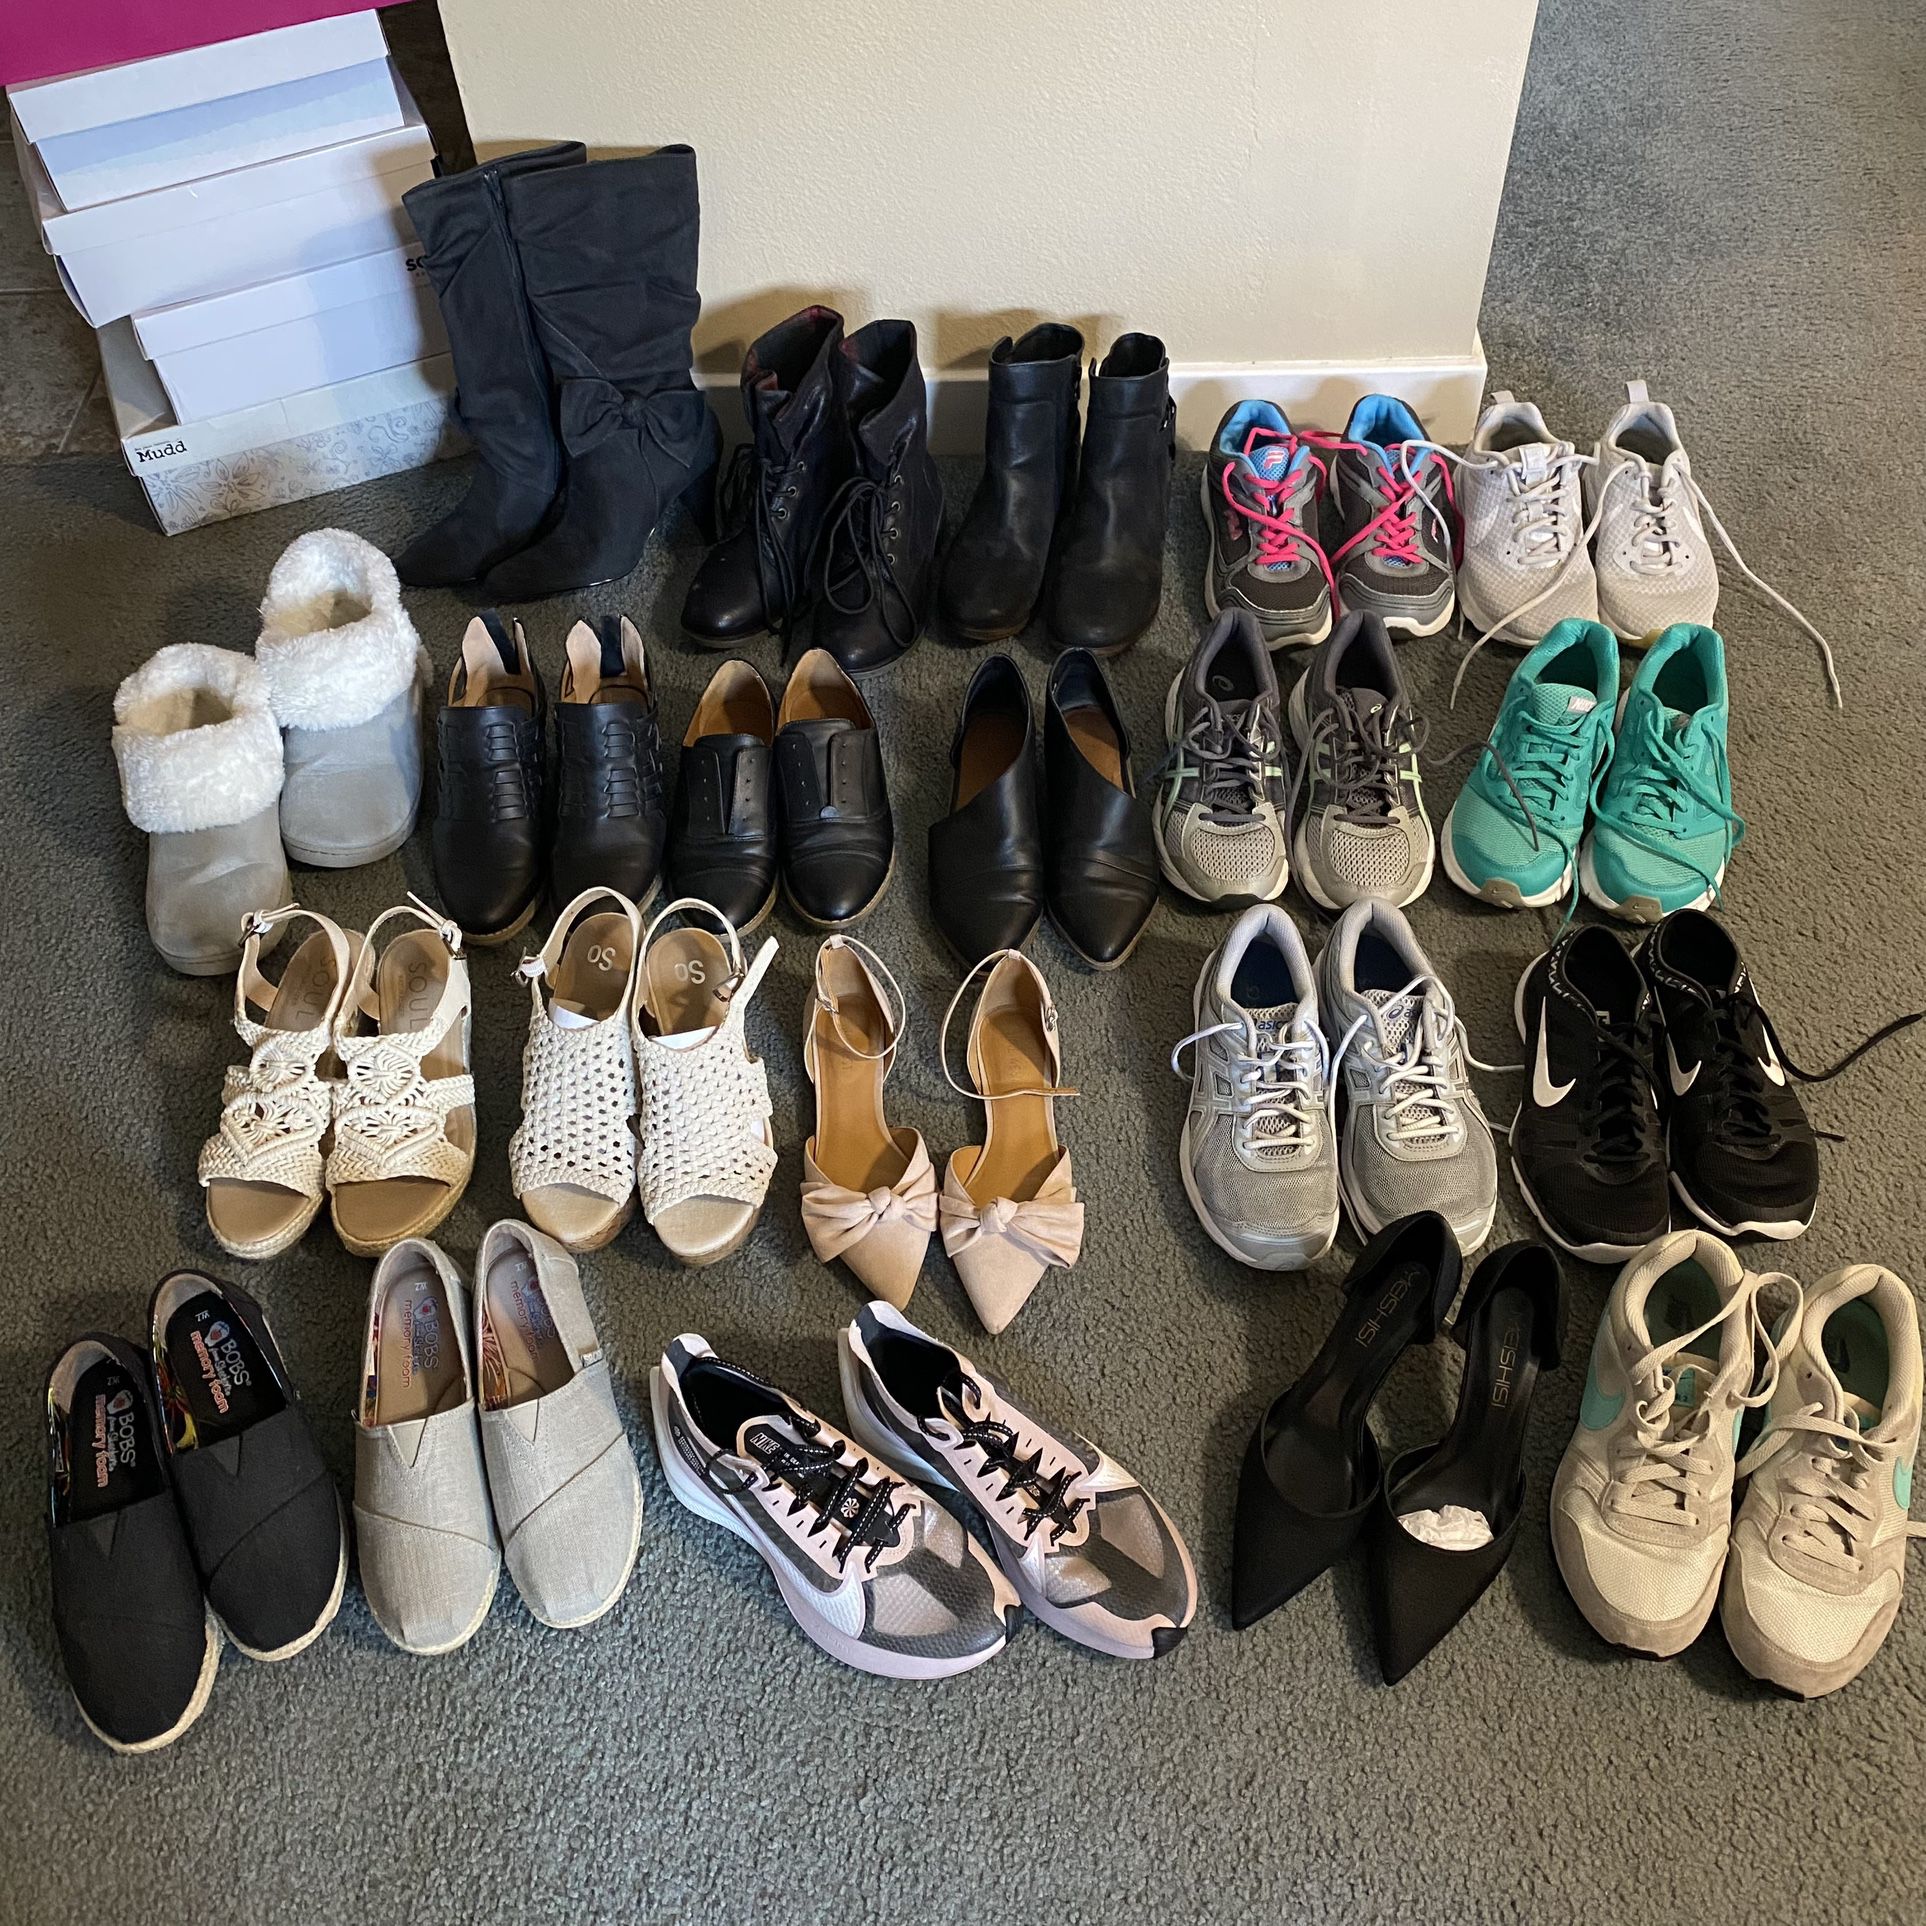 Lot of 21 pairs of women’s size 7, 7.5, 8 heels, sneakers, boots, Bobs, Nikes, reseller lot